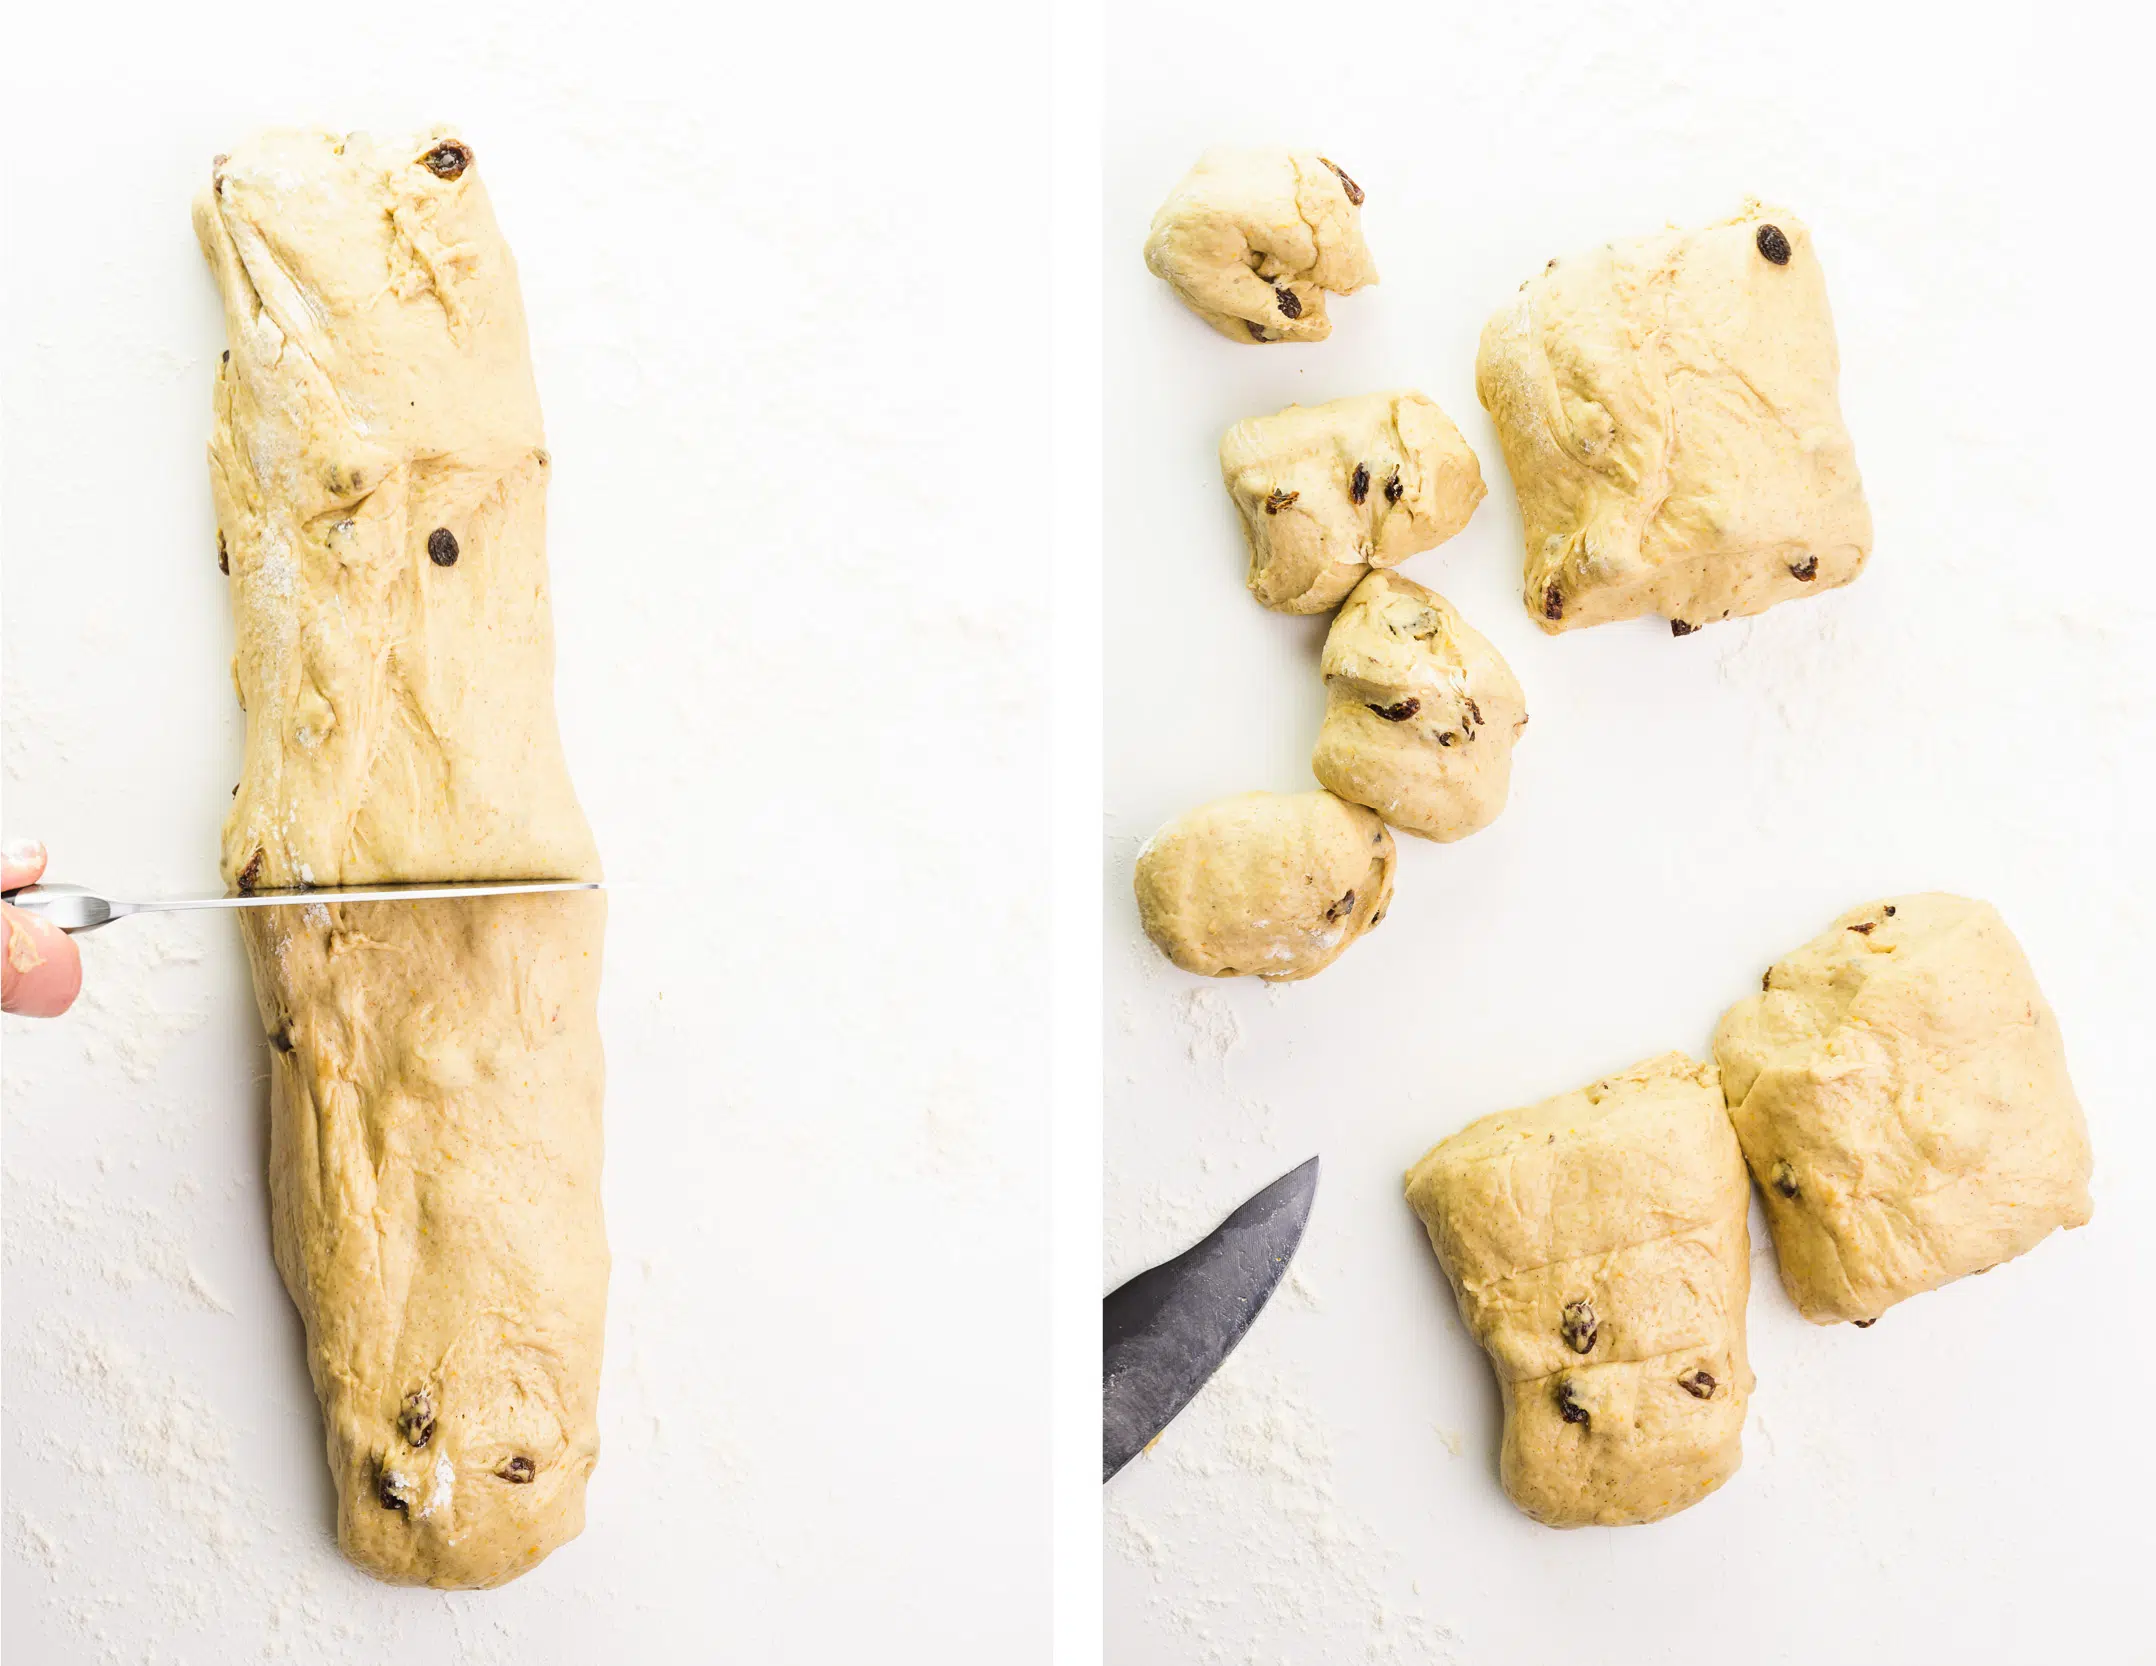 A collage of two images shows cutting a log in half on the left and the dough cut into smaller pieces on the right.